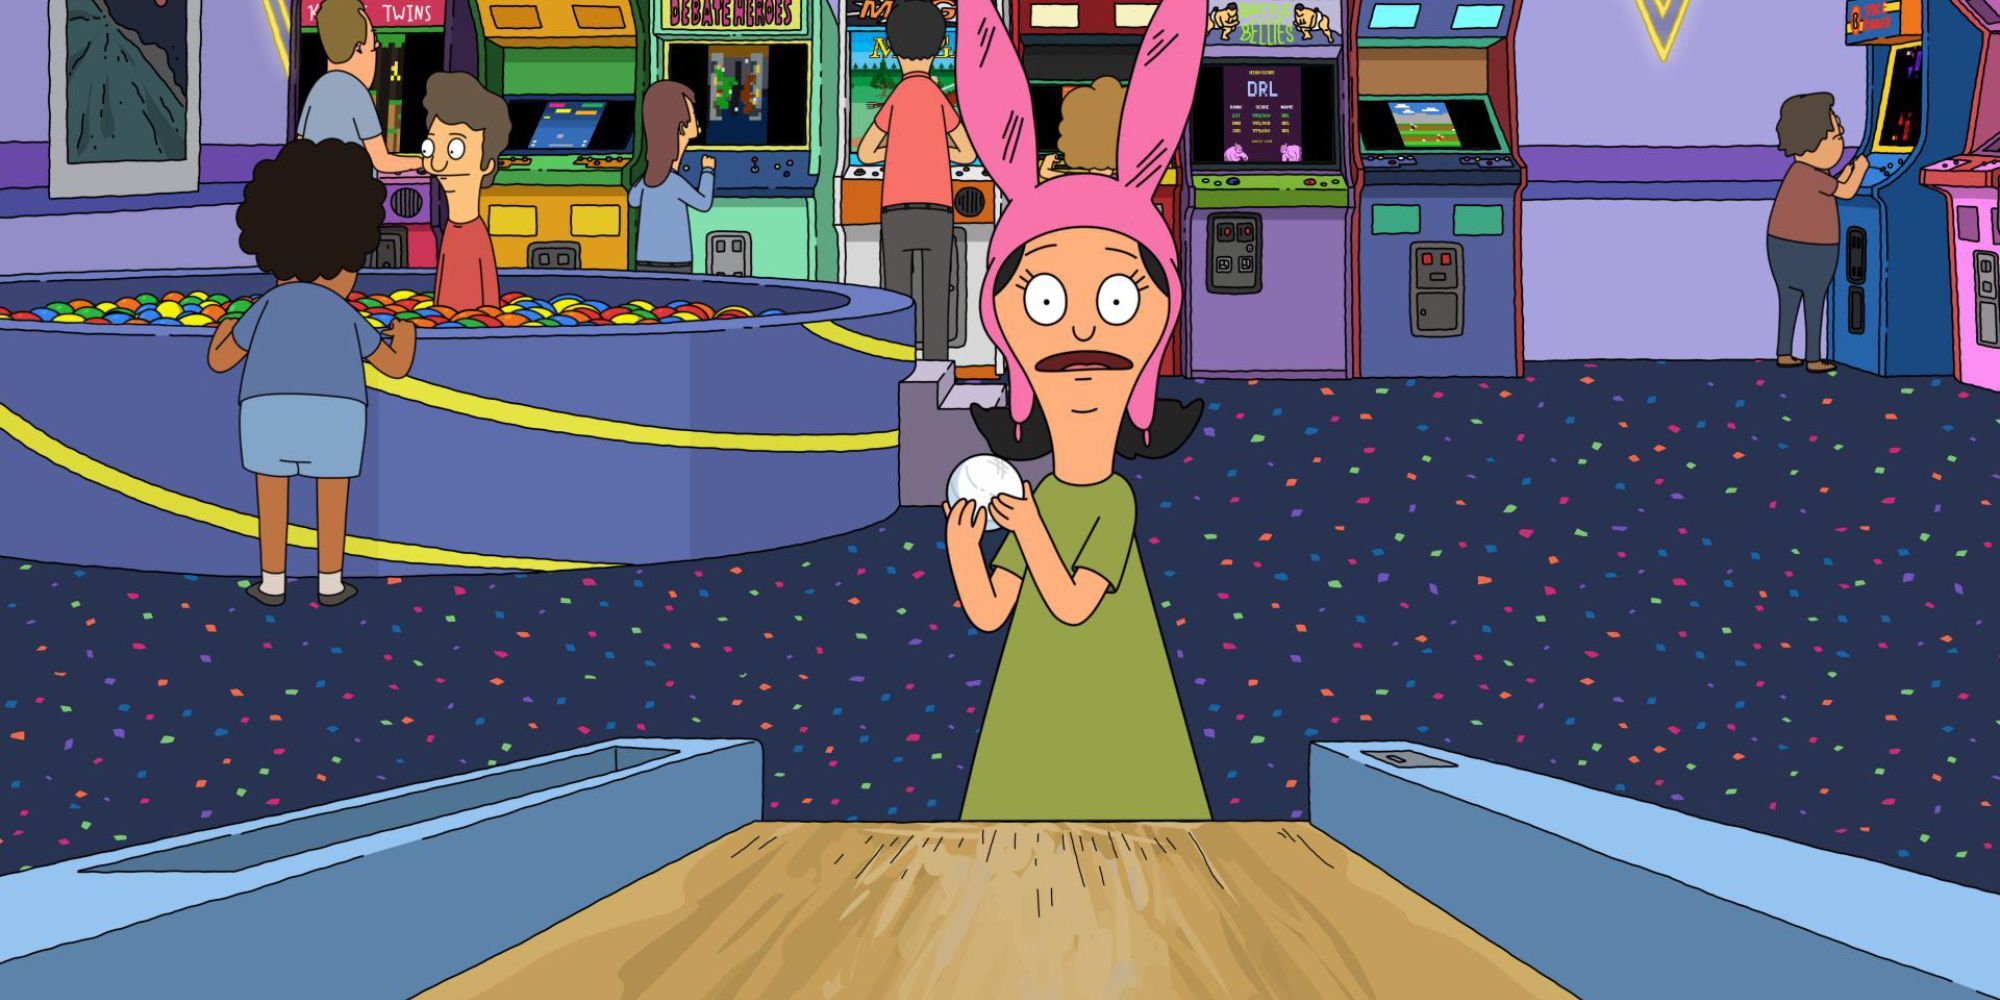 Louise playing in the arcade